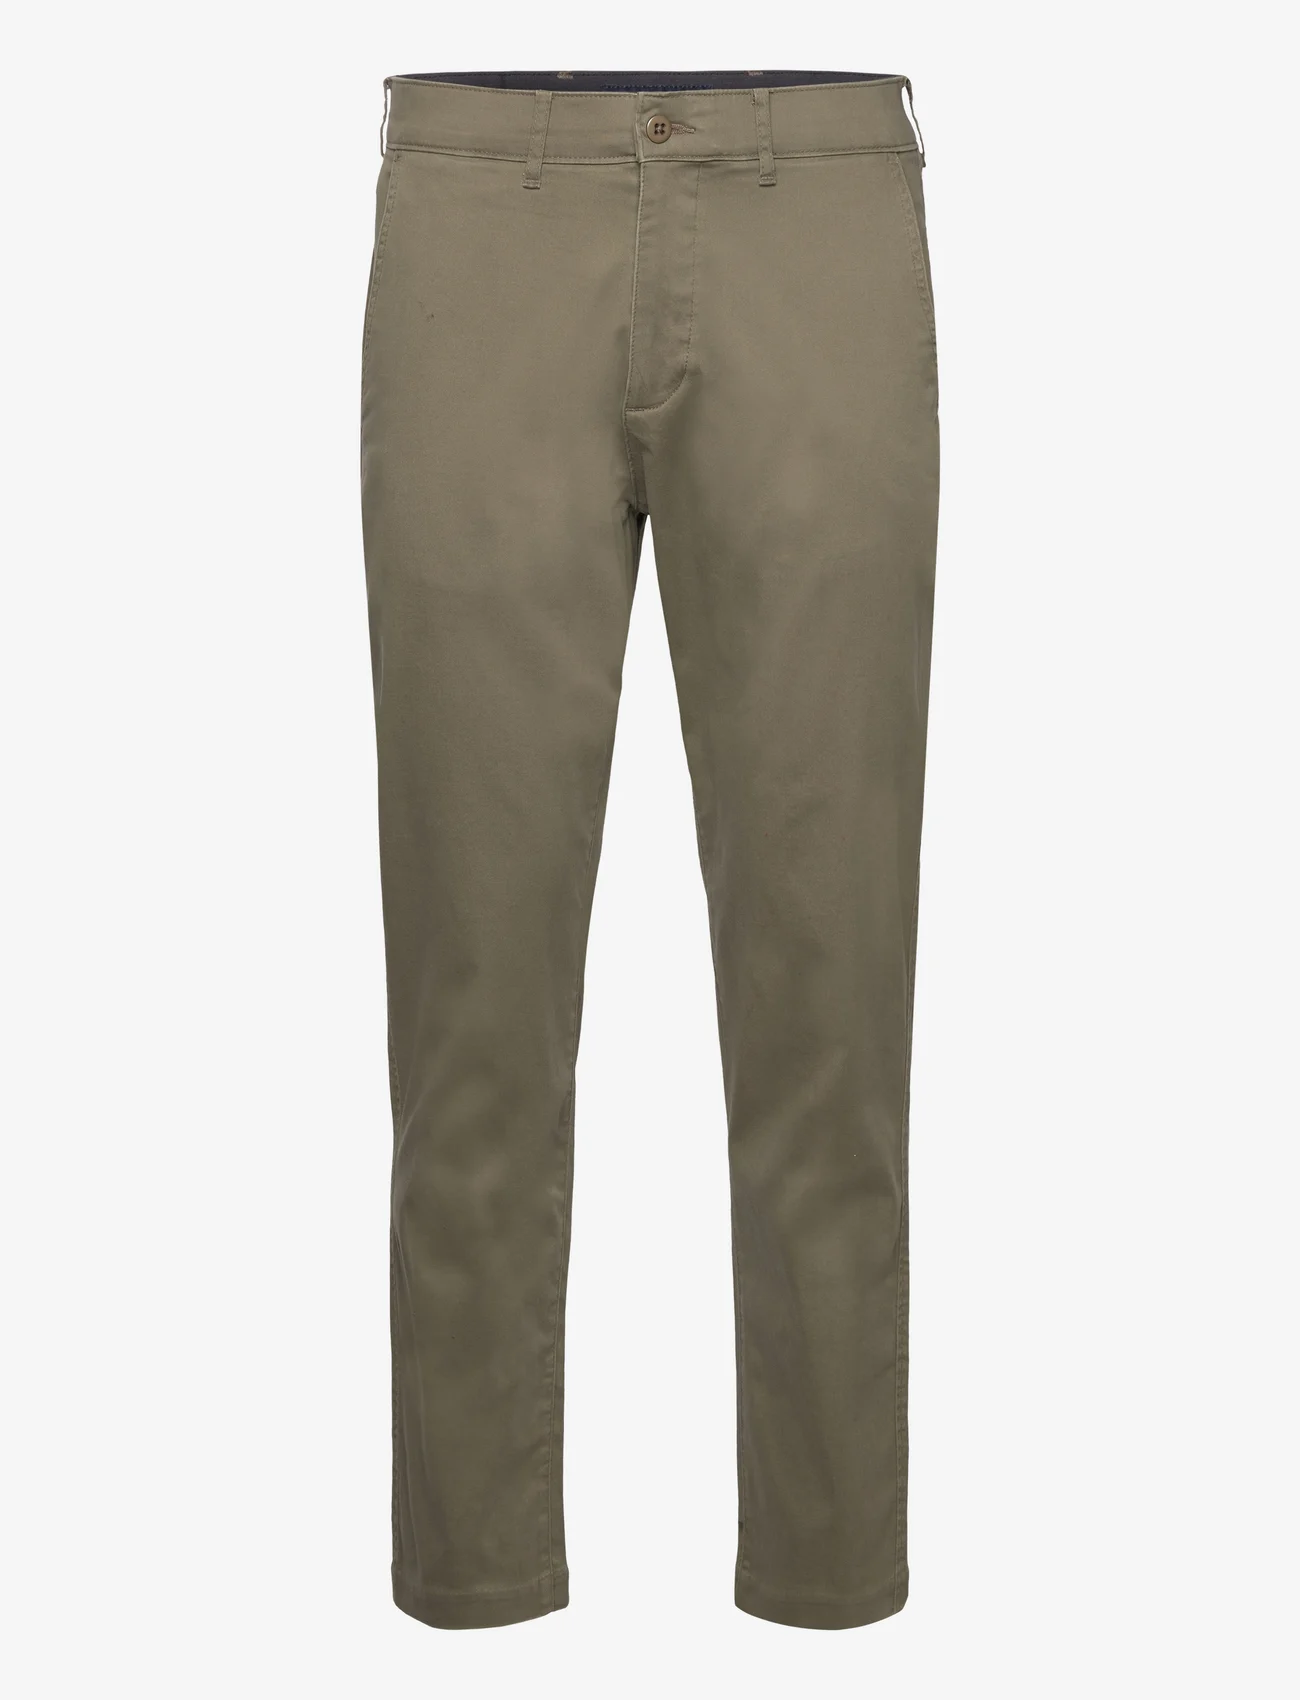 Abercrombie & Fitch - ANF MENS PANTS - chino's - grape leaf - 0